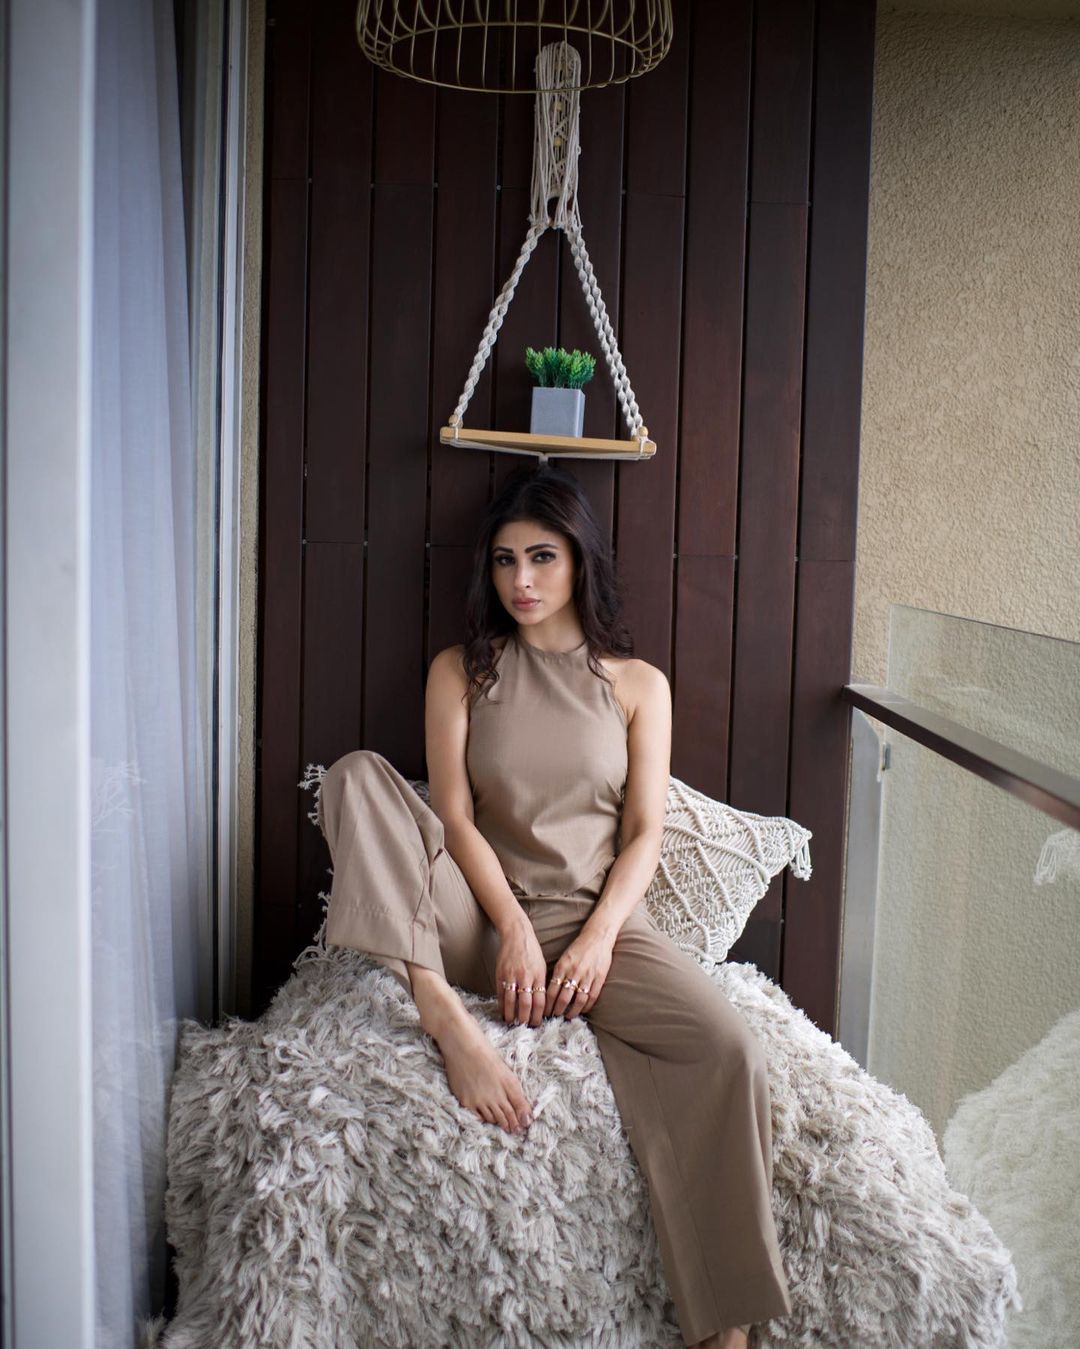 Acterss mouni roy melts our hearts with her spicy stills-Actressmouniroy, Mouniroy, Mouni Roy Photos,Spicy Hot Pics,Images,High Resolution WallPapers Download